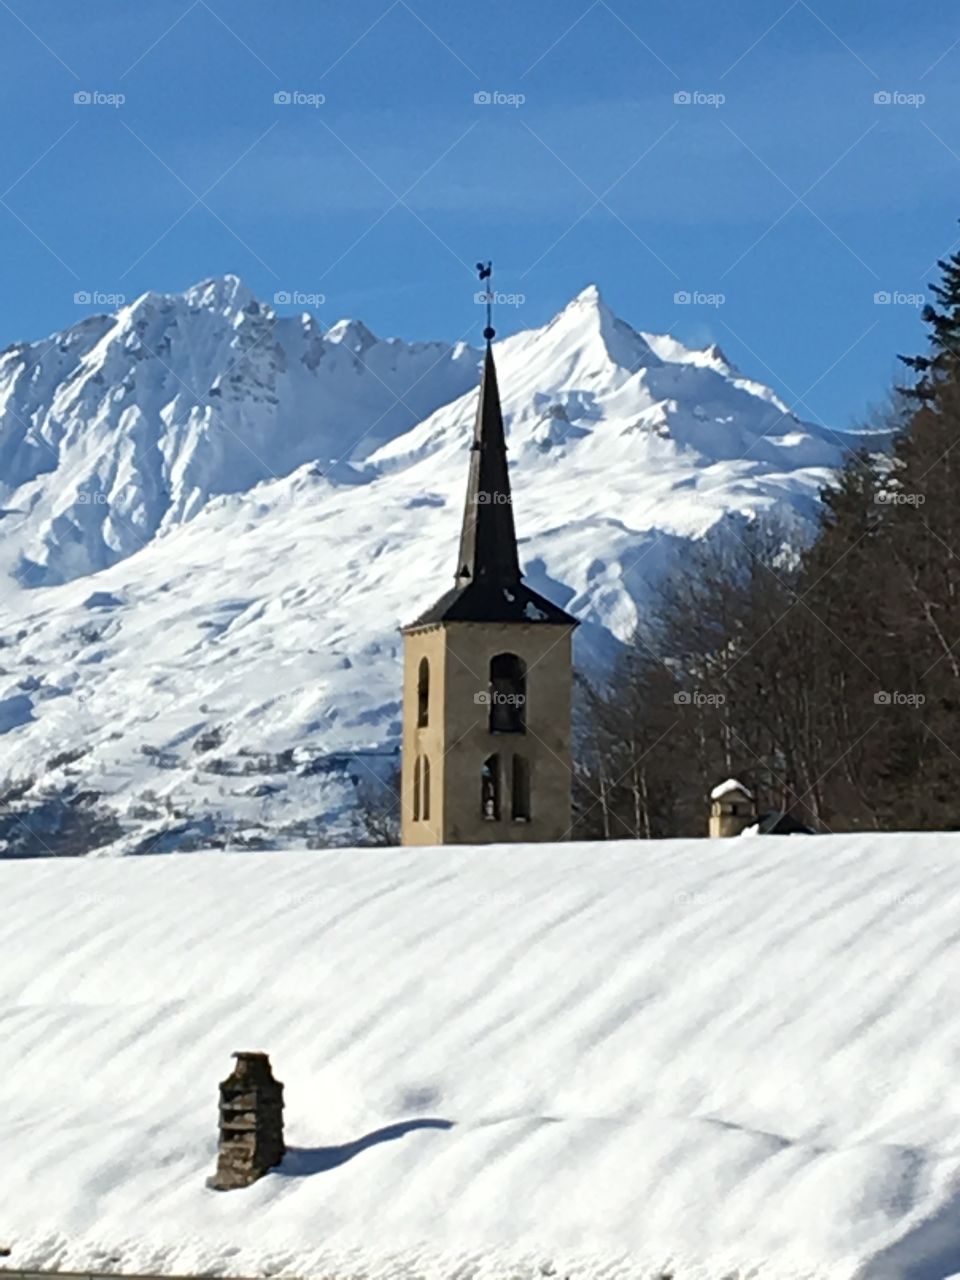 Roof, church and mountain